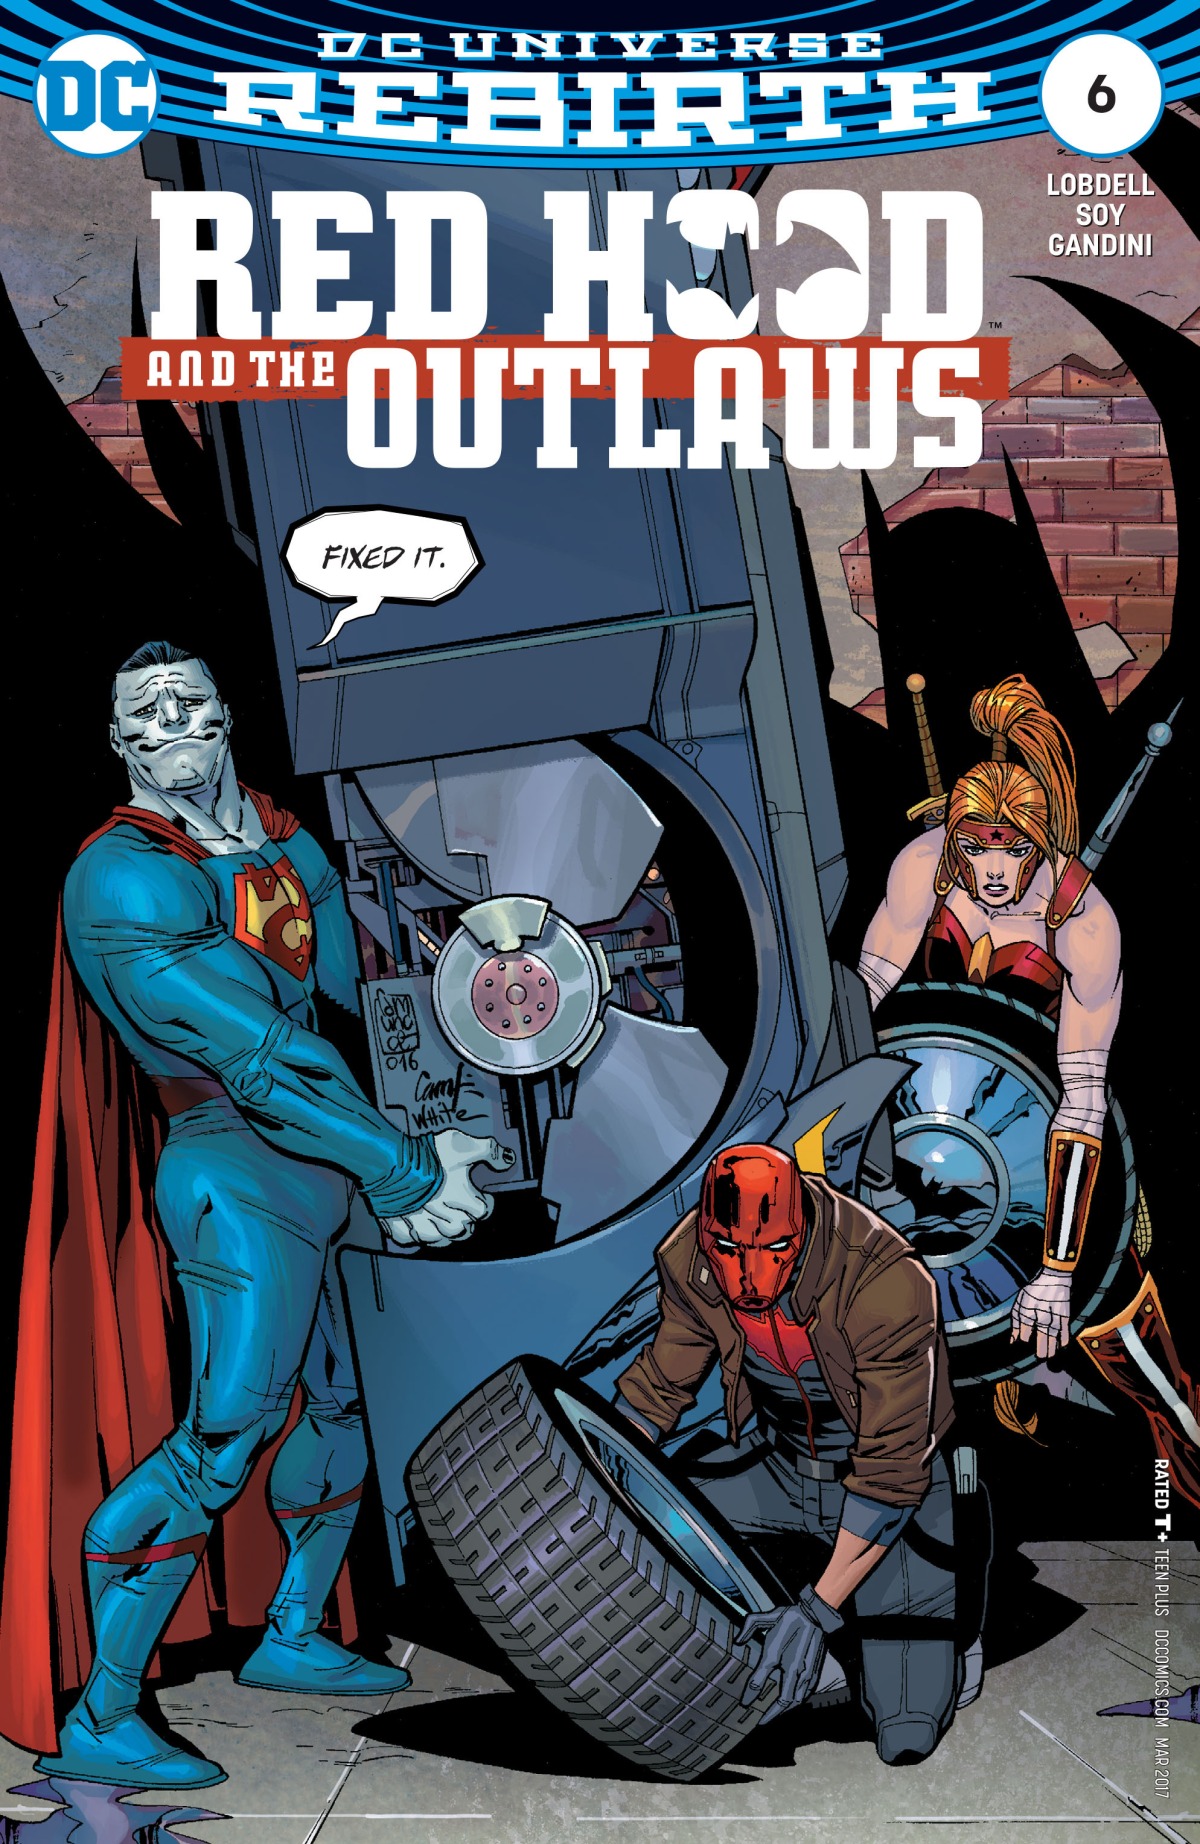 Red Hood And The Outlaws #6 Review